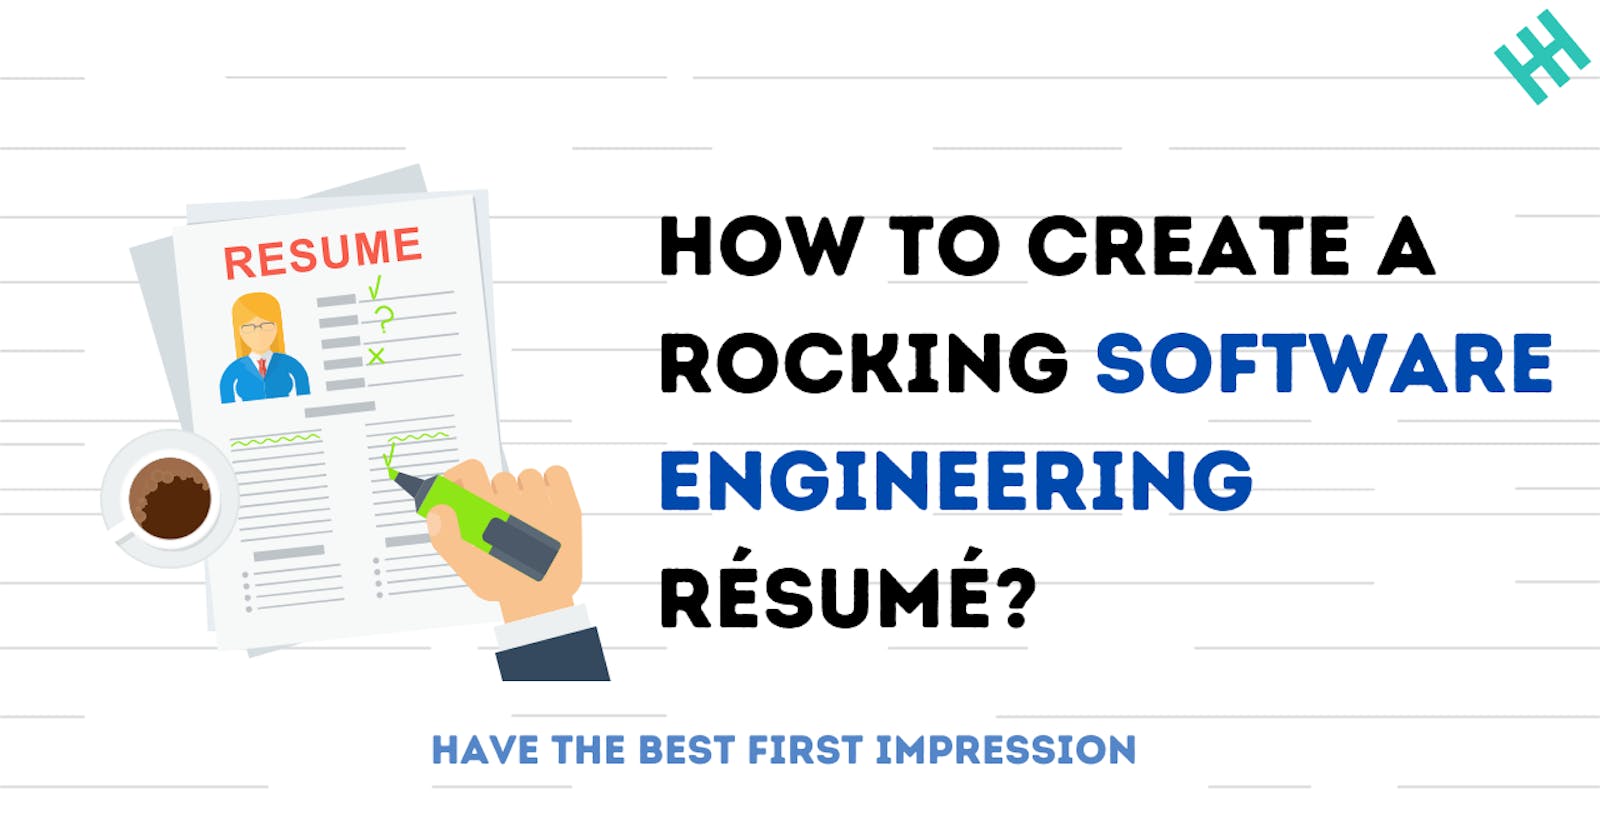 How To Create A Rocking Software Engineering Résumé? (Have The Best First Impression)